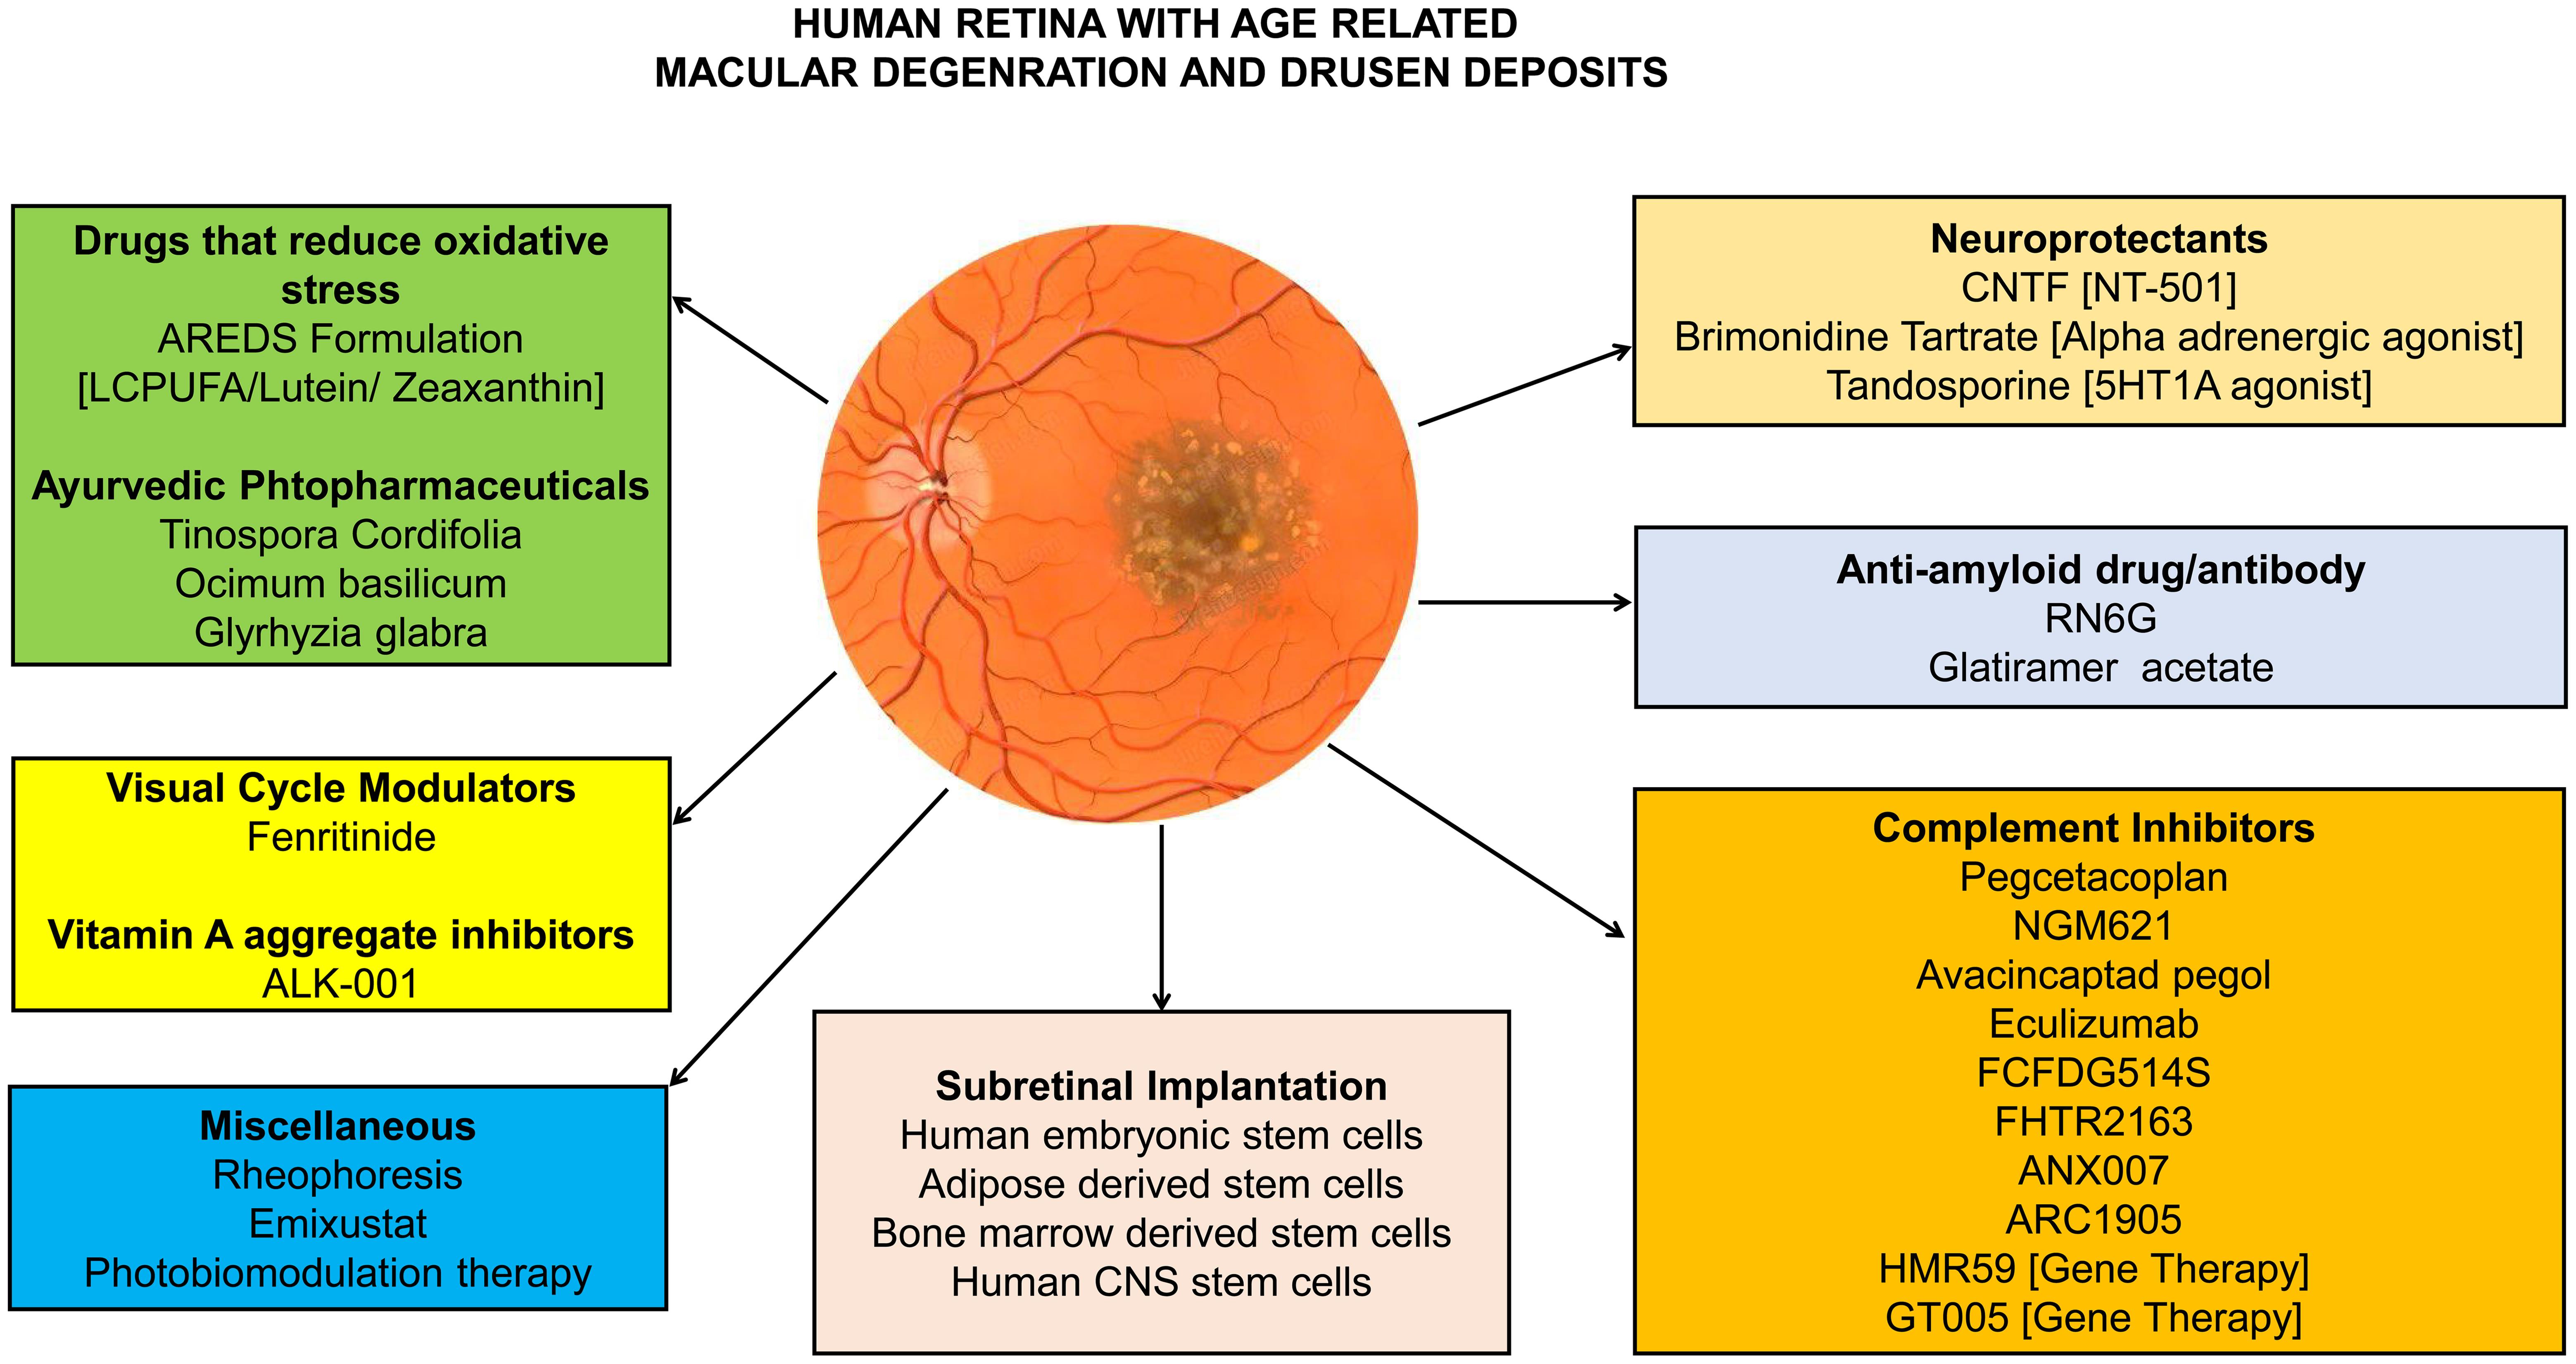 Pipeline investigational drugs for dry age related macular degeneration and geographical atrophy.